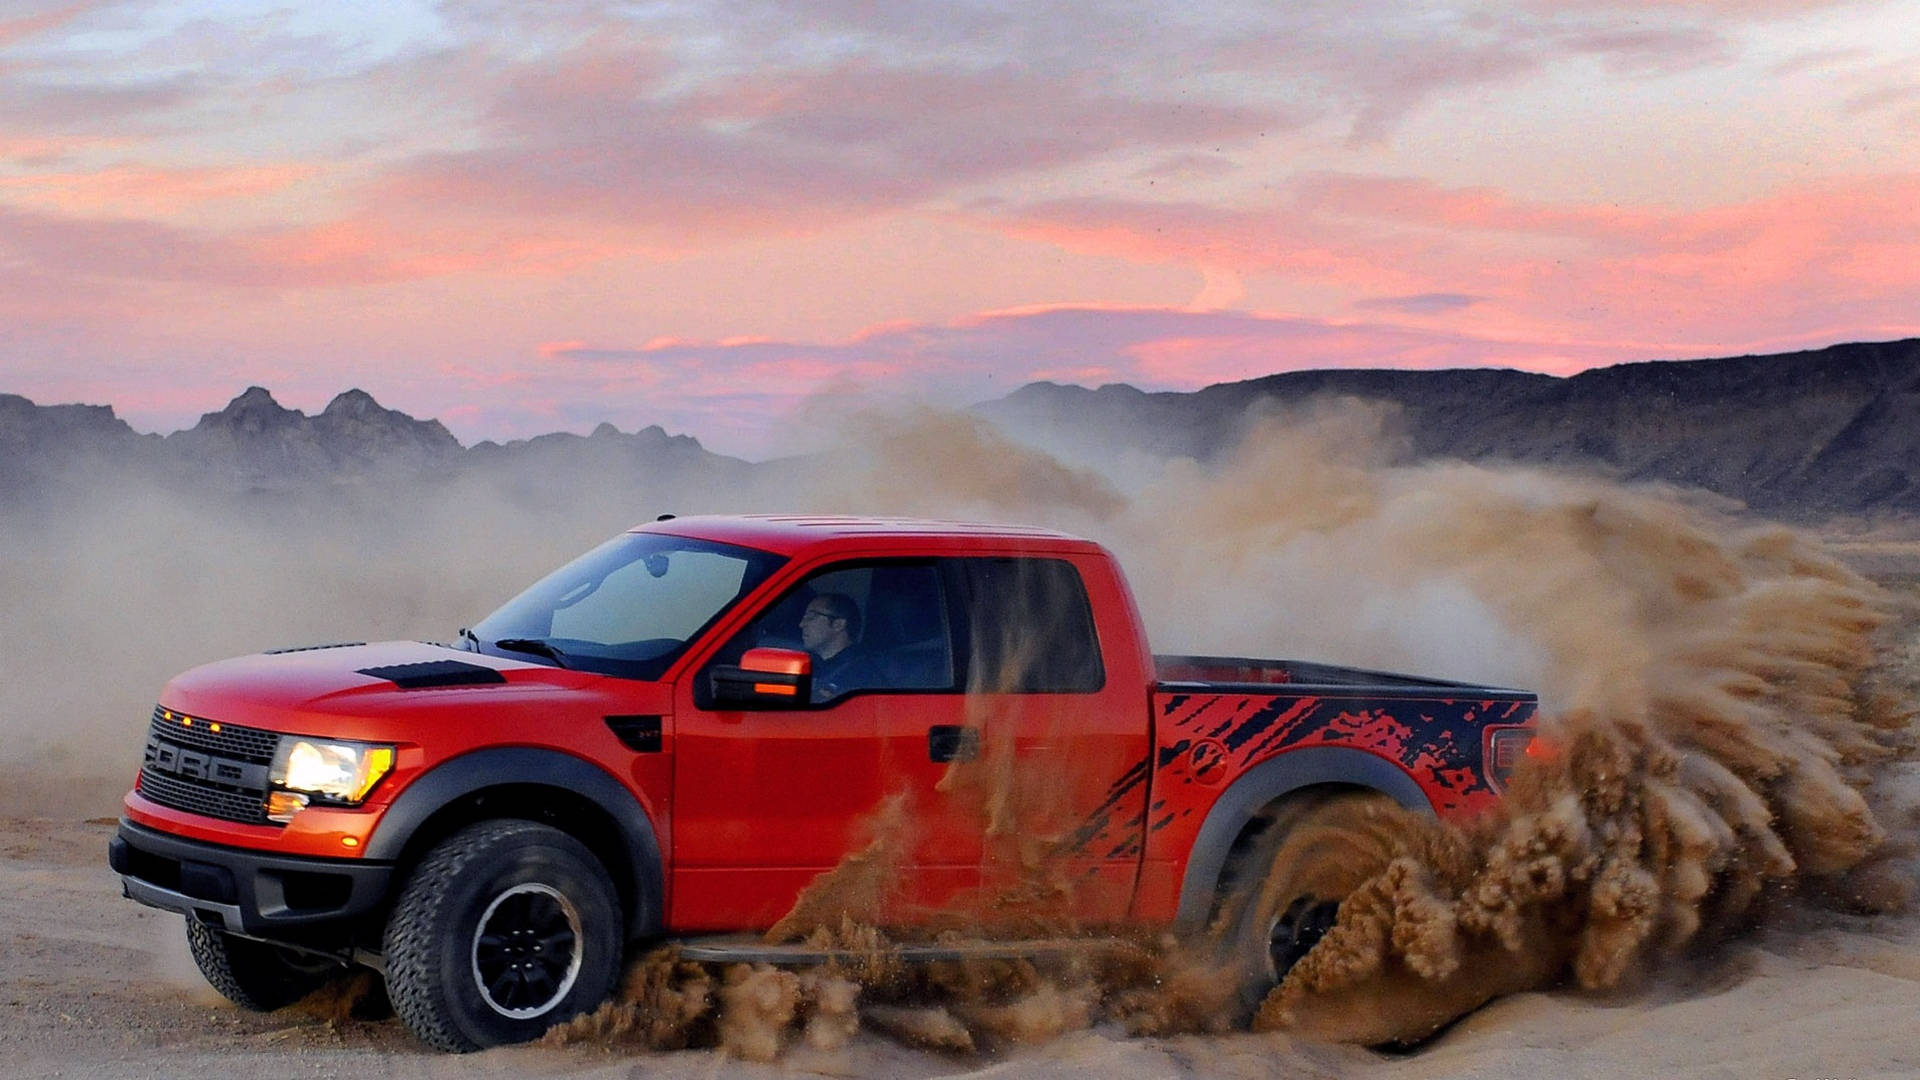 Ford Raptor With Dust Trail Background